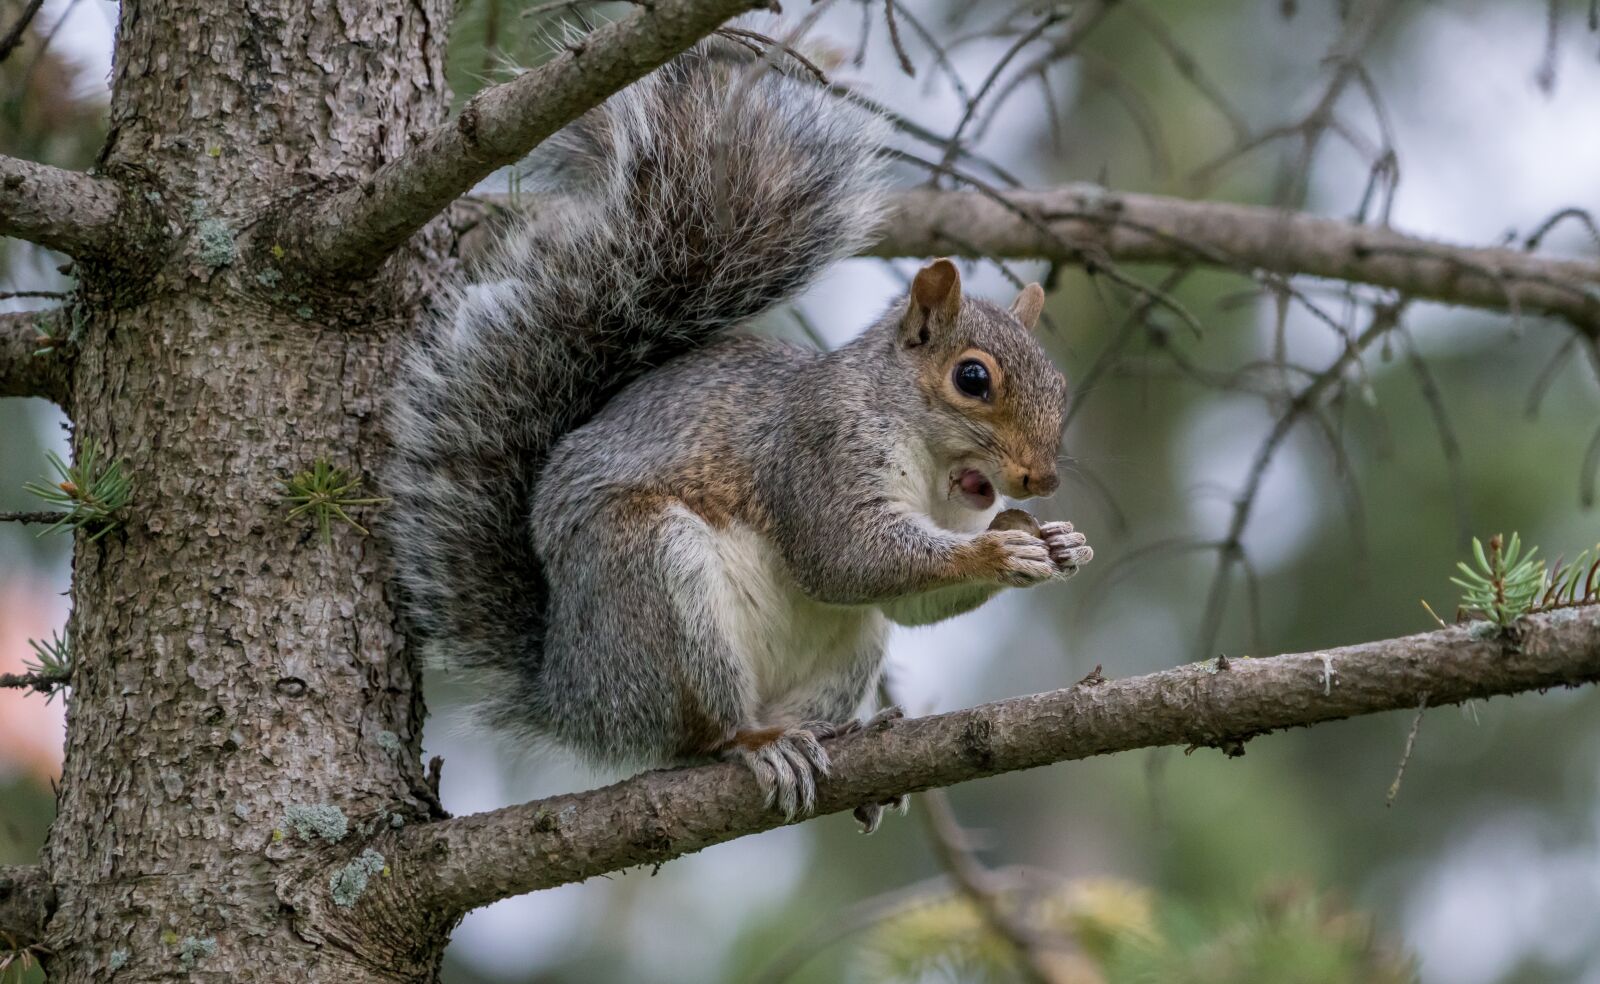 Sony a7R II sample photo. Squirrel, eating, nature photography